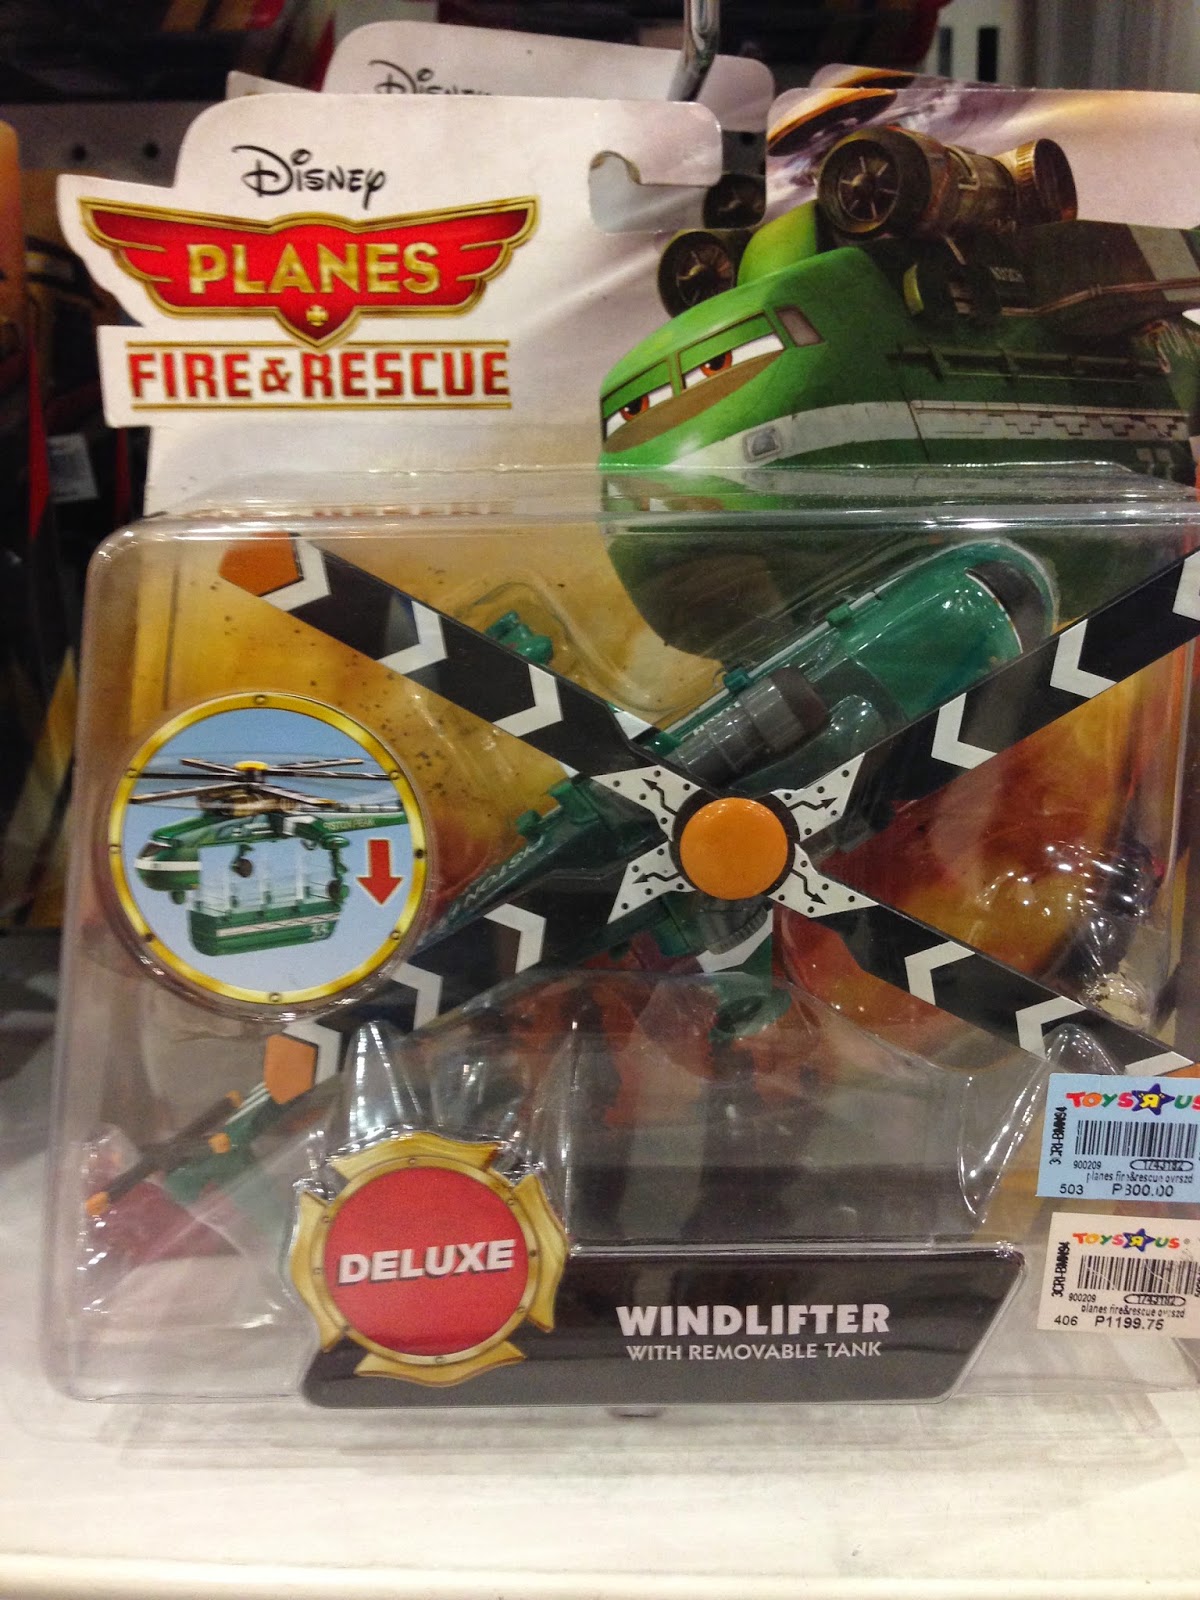 Toy Sale in Manila, Philippines 2015 : Disney Planes Die-Cast Toys on SALE (Windlifter)